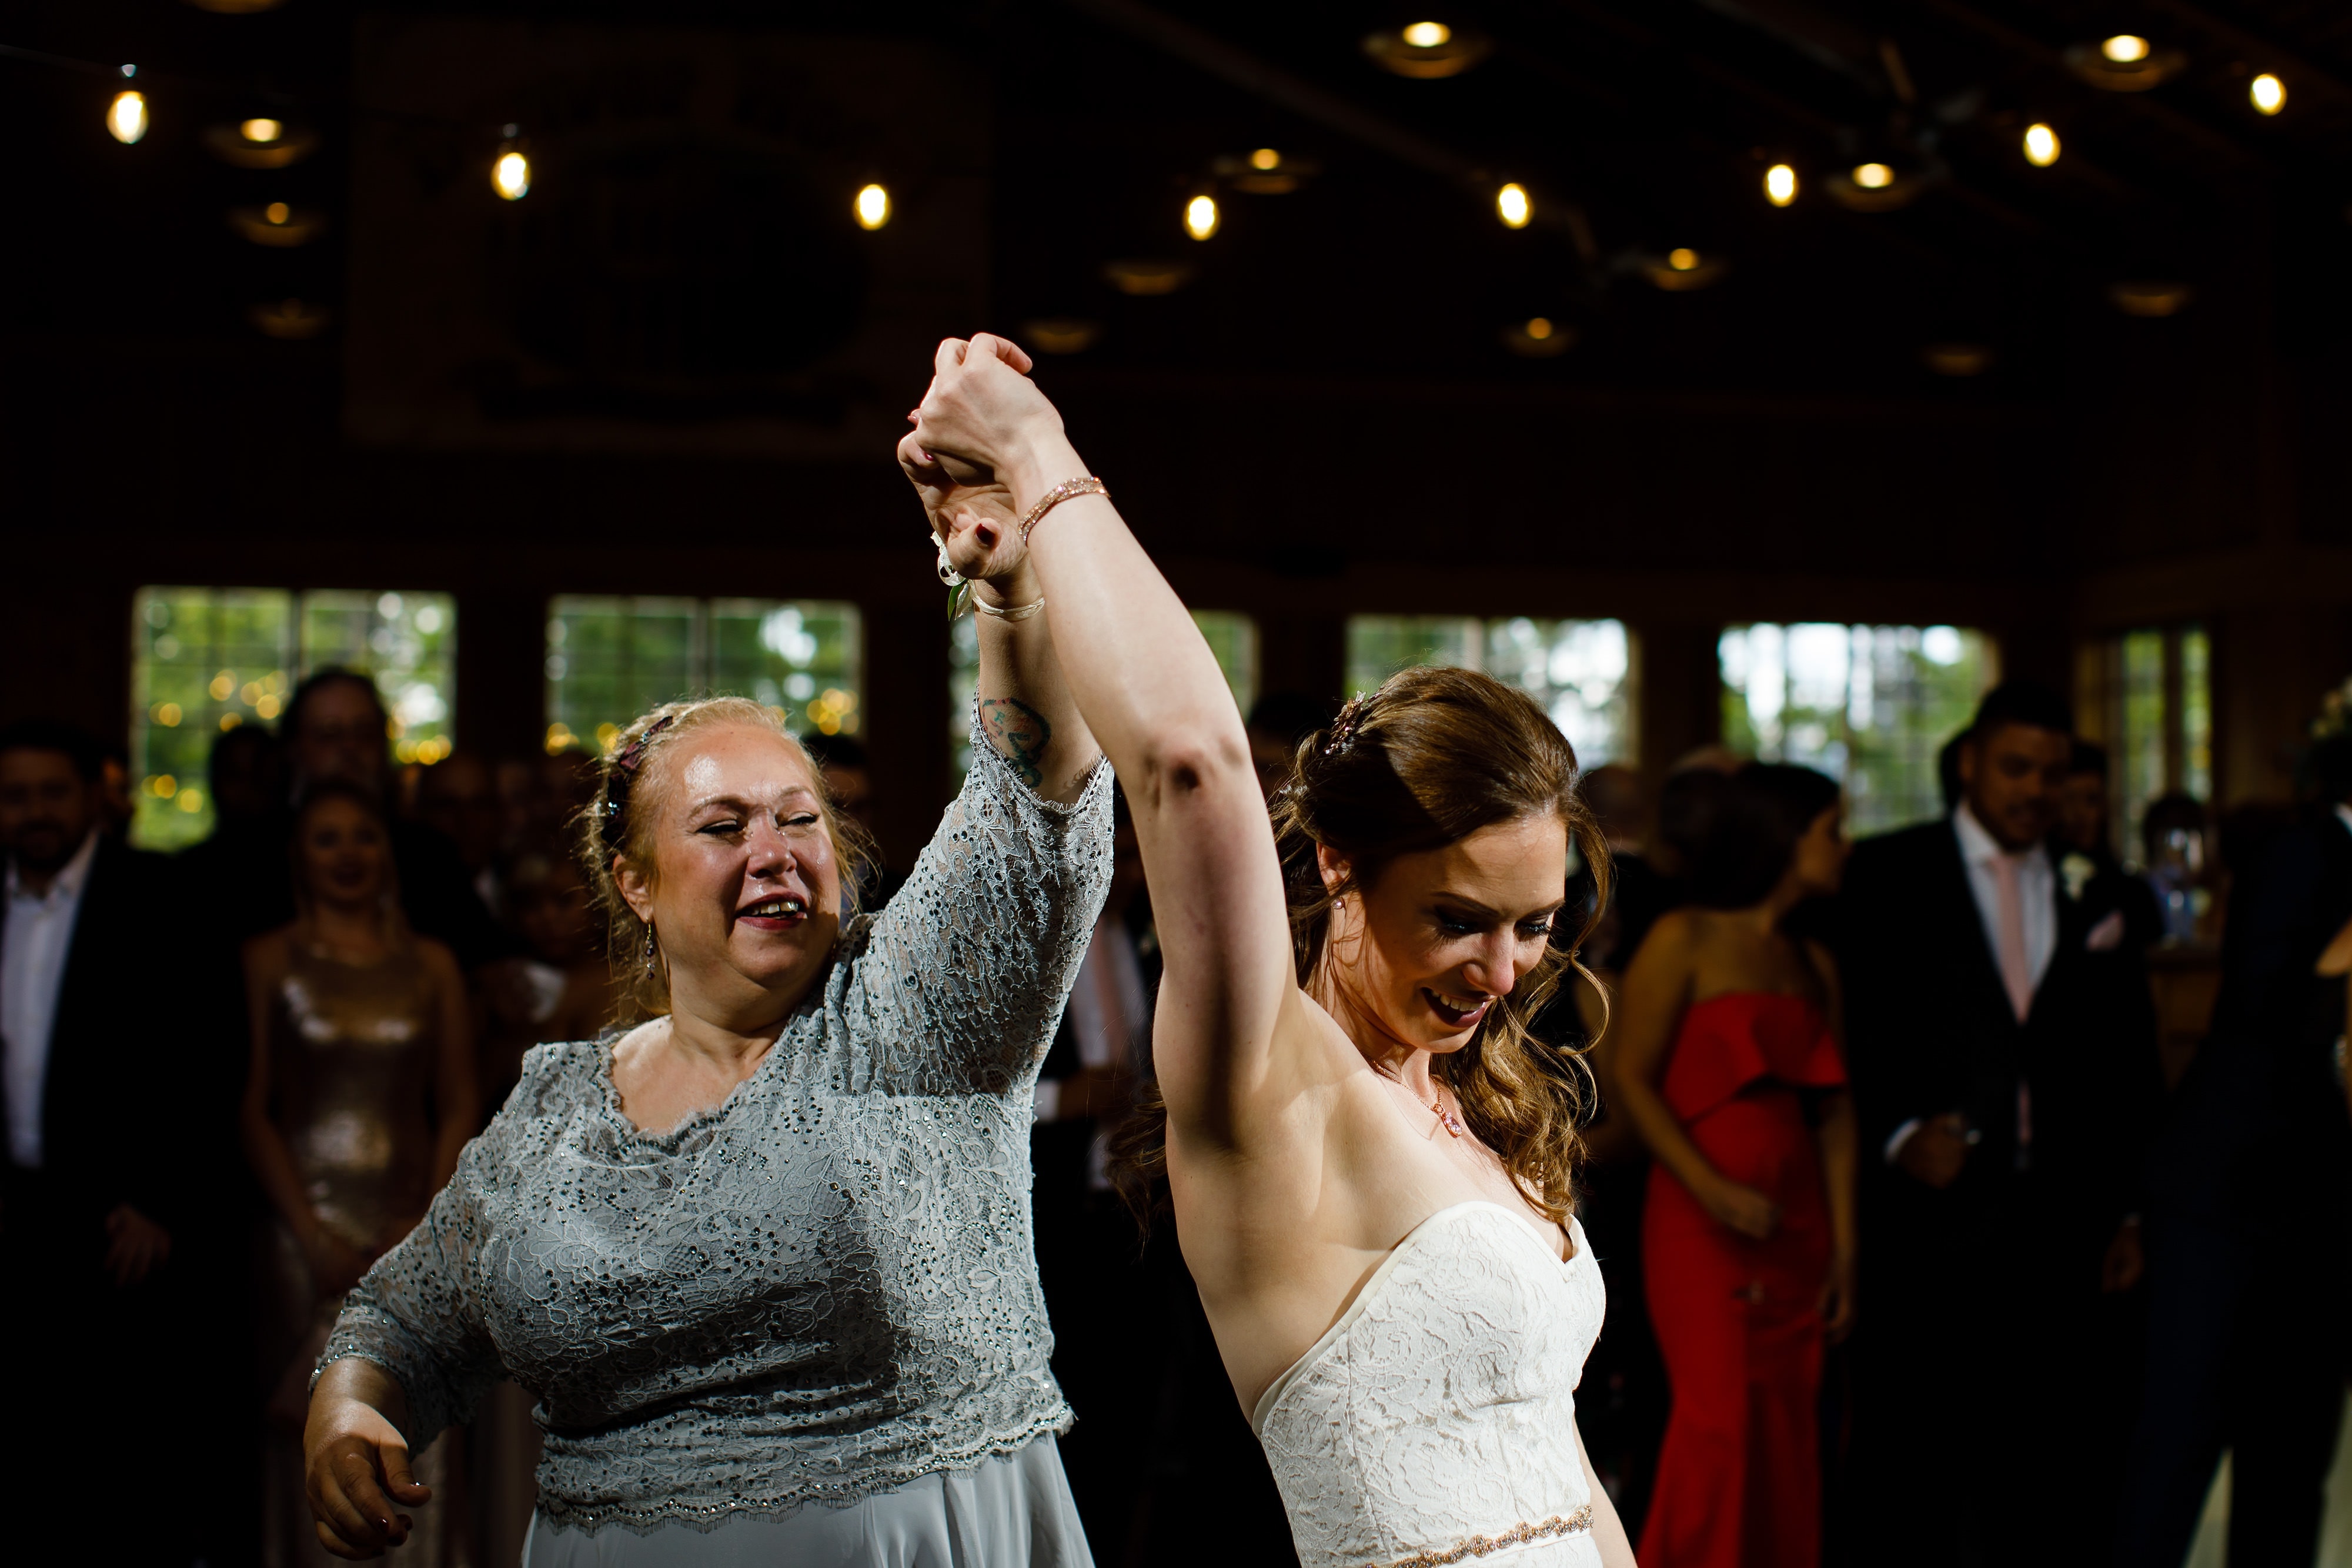 Sharon dances with her mother